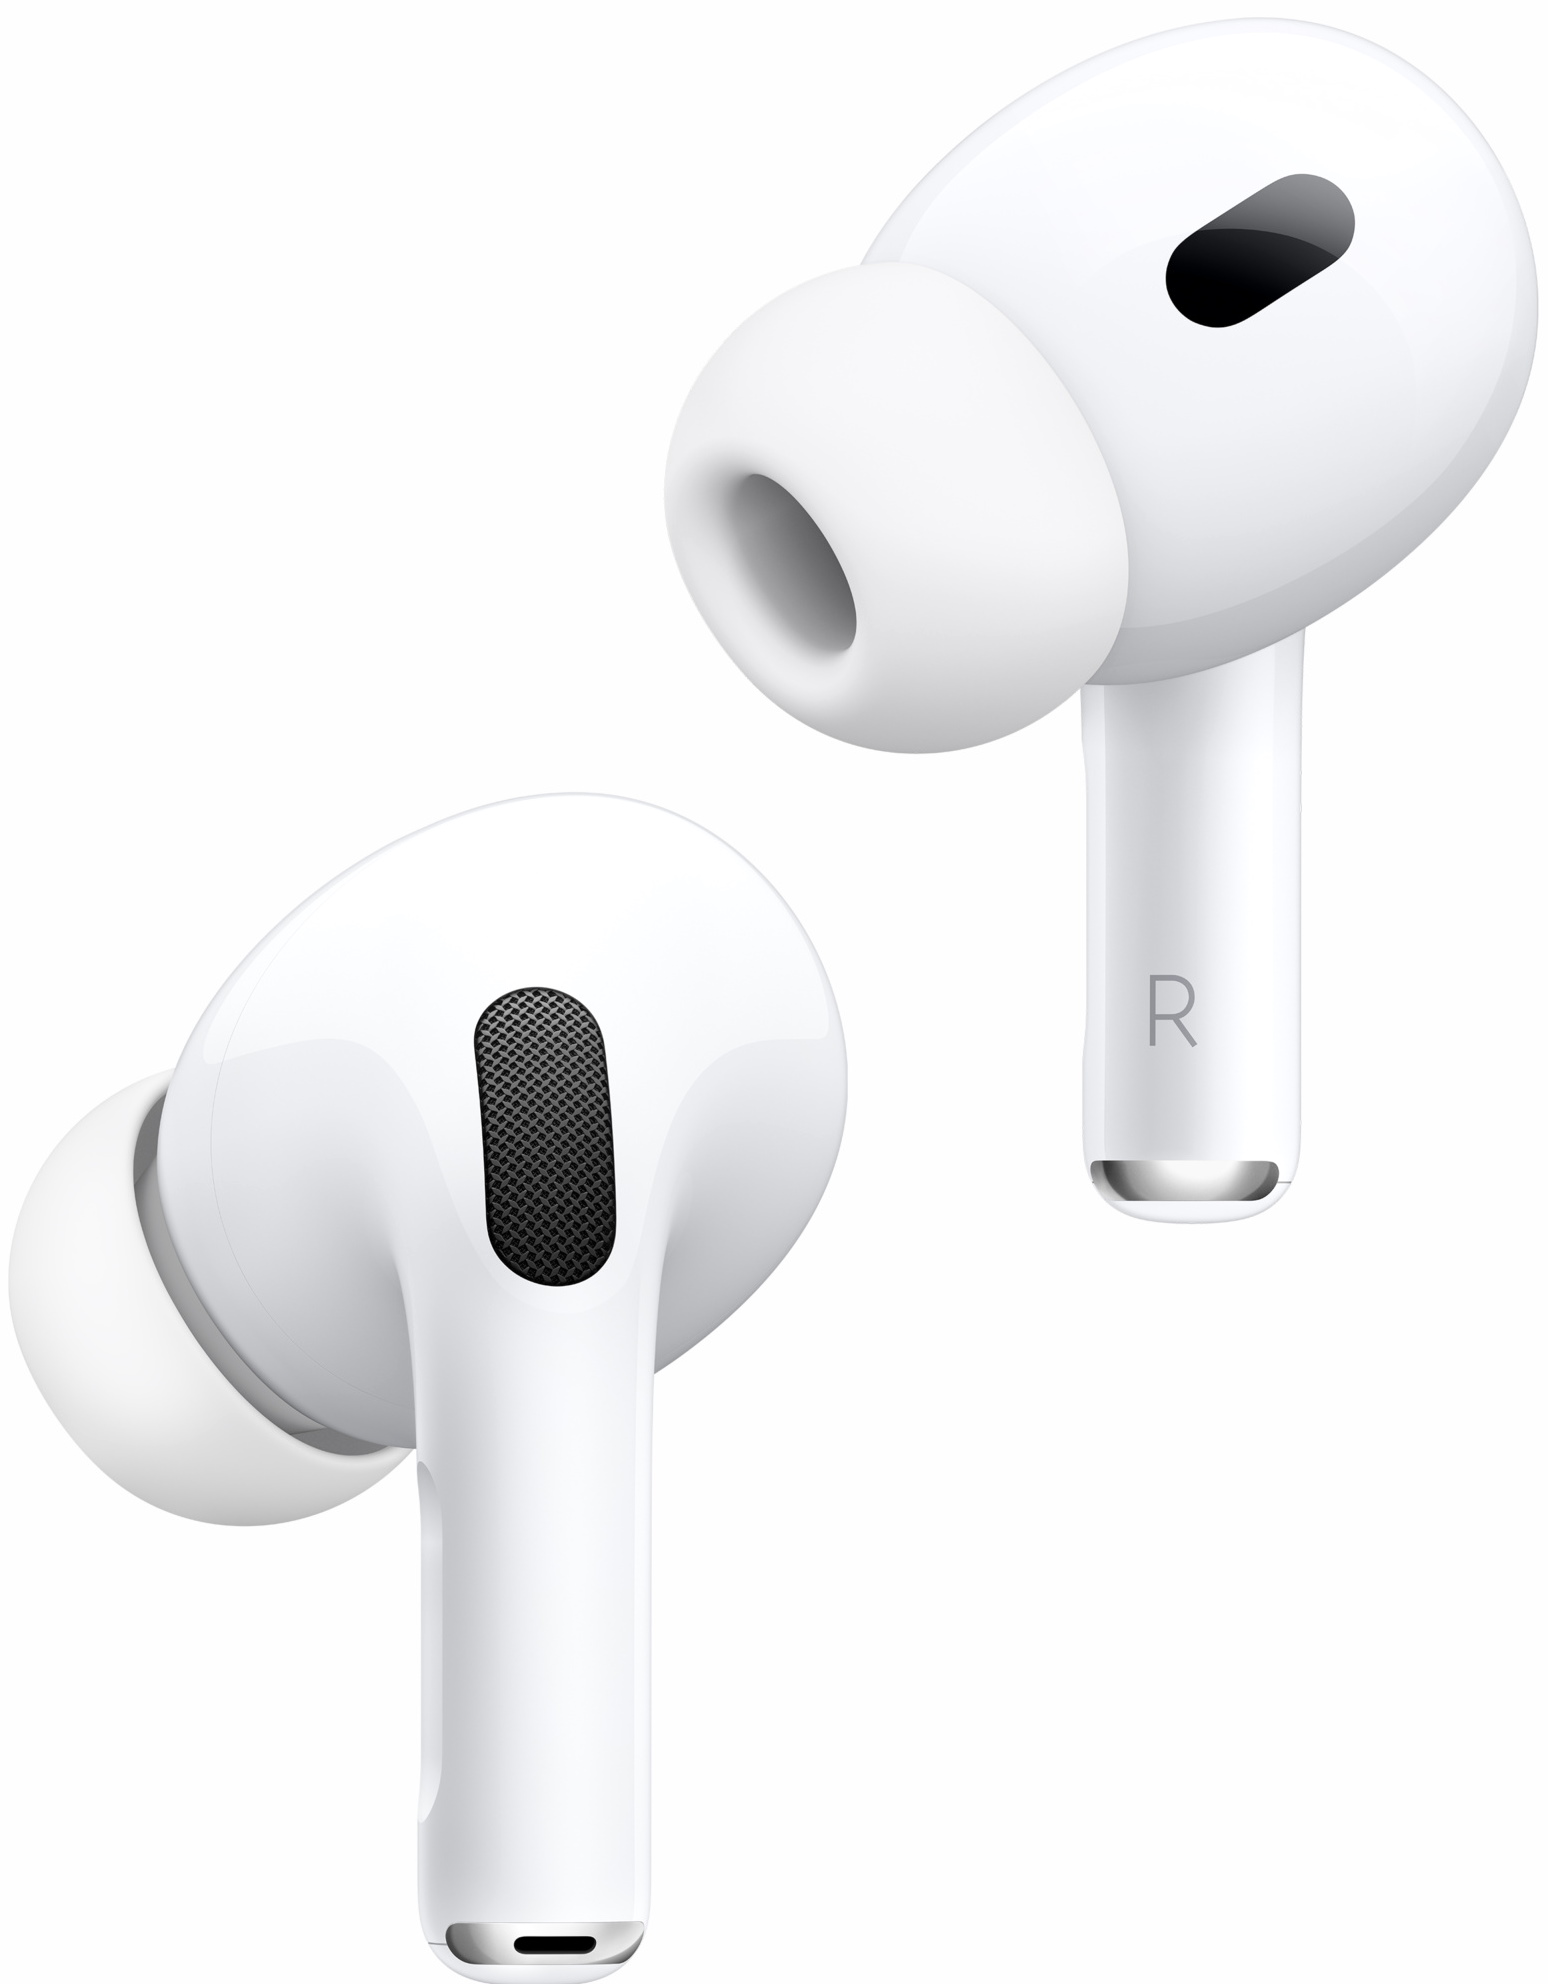 Apple Pro 2nd generation - prices in stores Ukraine. Buy Apple AirPods Pro 2nd generation Kyiv, Dnepropetrovsk, Lviv, Odessa